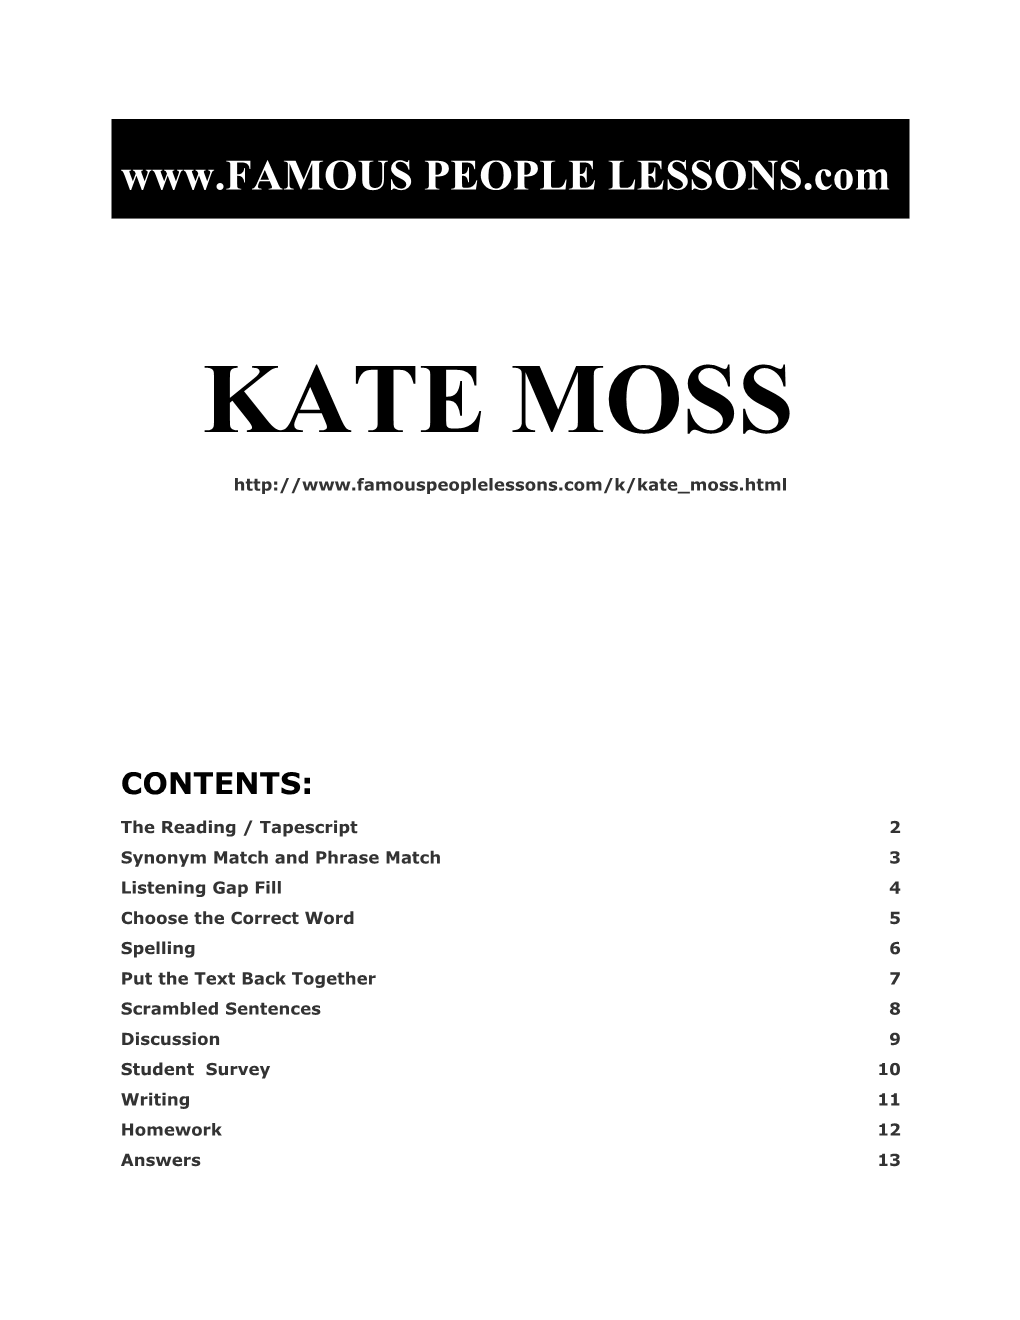 Famous People Lessons - Kate Moss